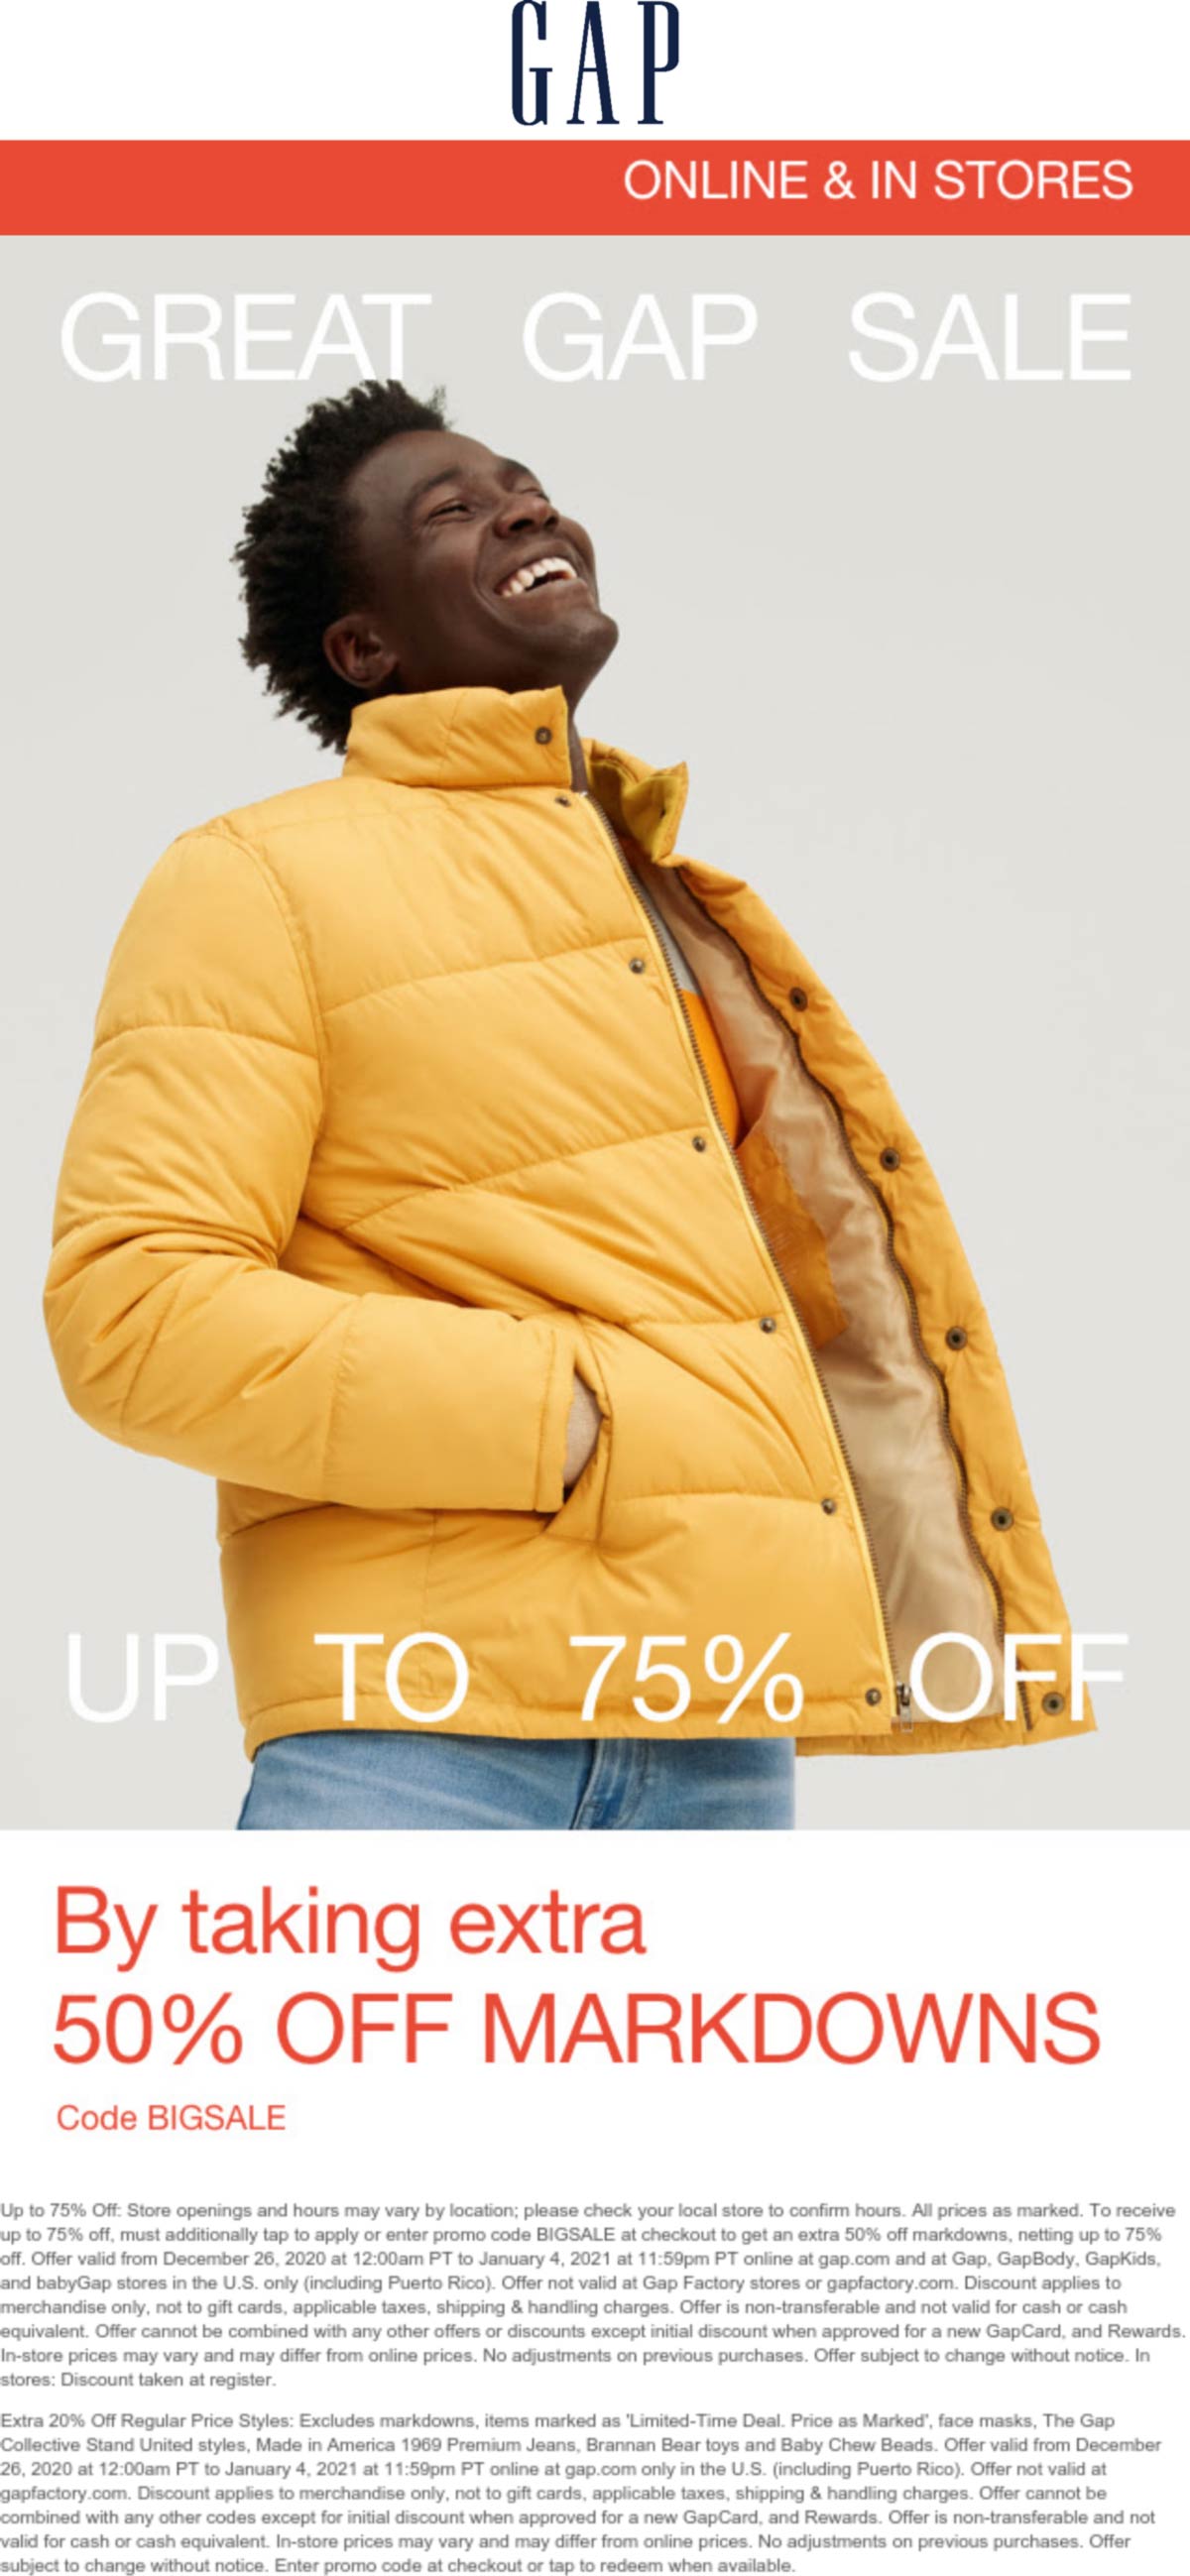 Gap stores Coupon  Extra 50% off sale items & more at Gap, or online via promo code BIGSALE #gap 